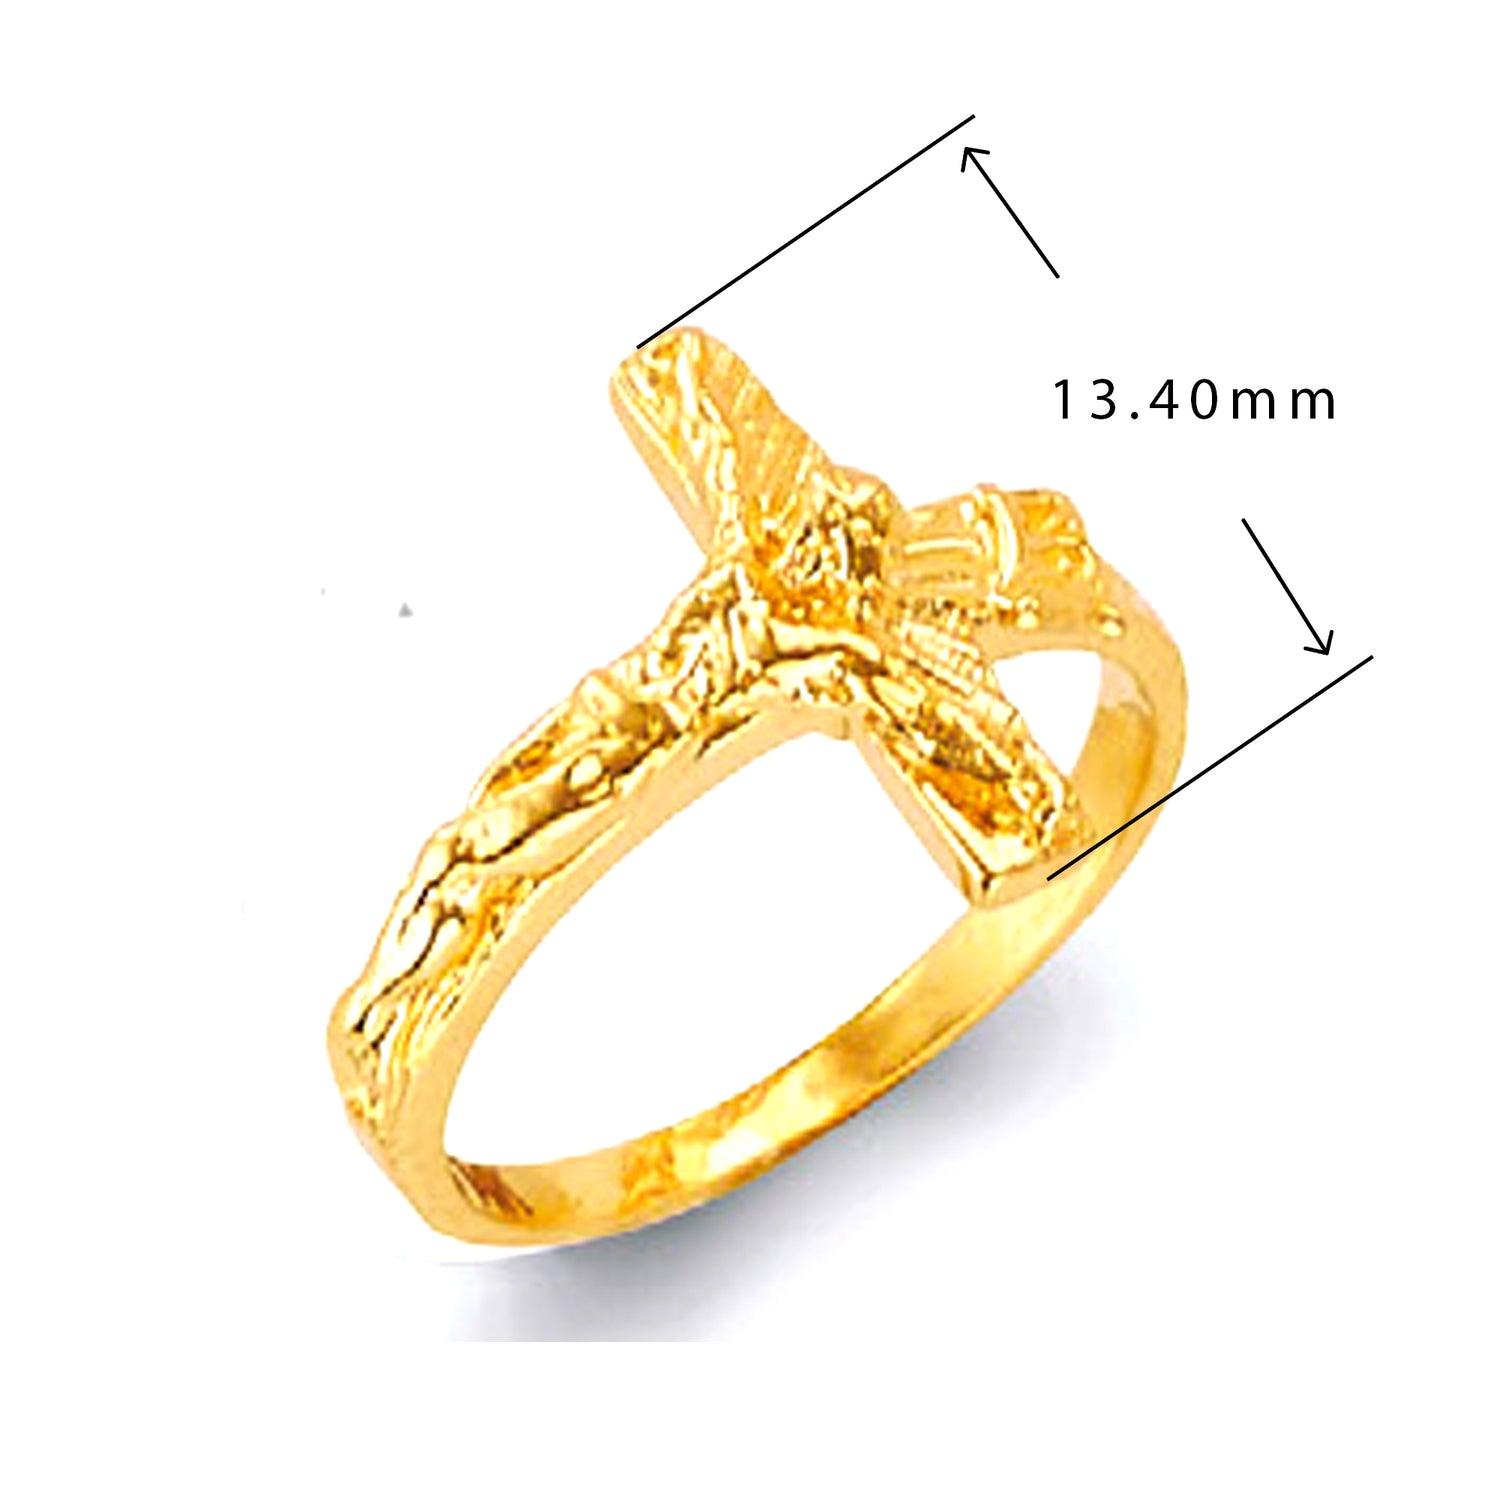 Religious Cross Ring in Solid Gold with Measurement